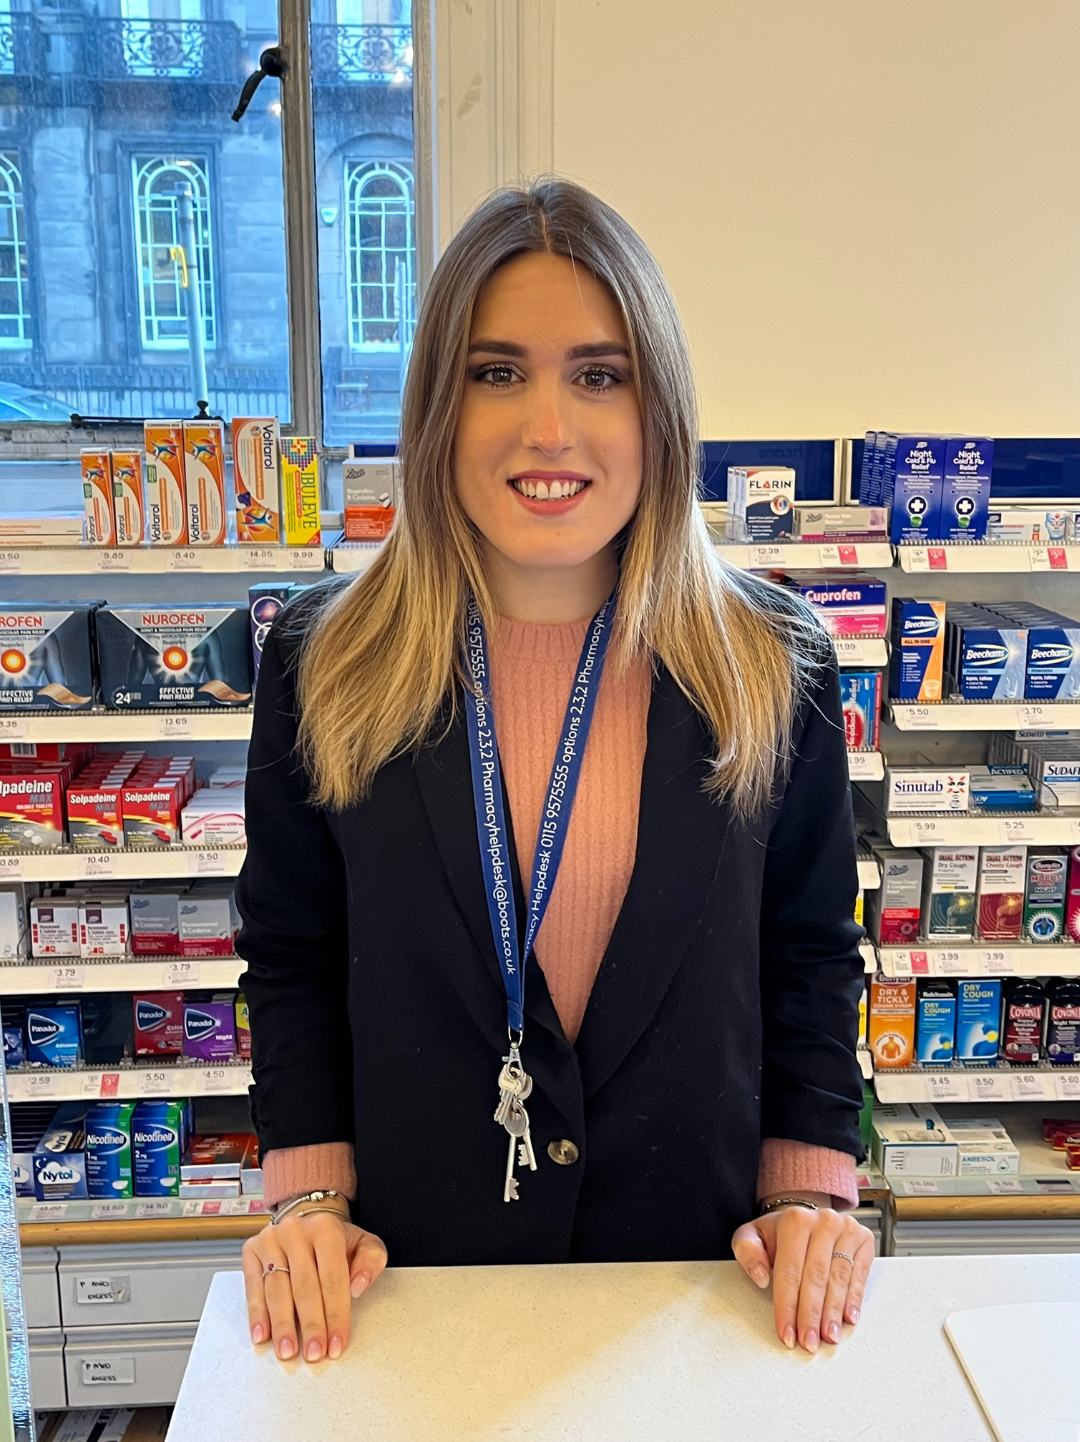 Relocating and experiencing community pharmacy in the UK – Milly’s story